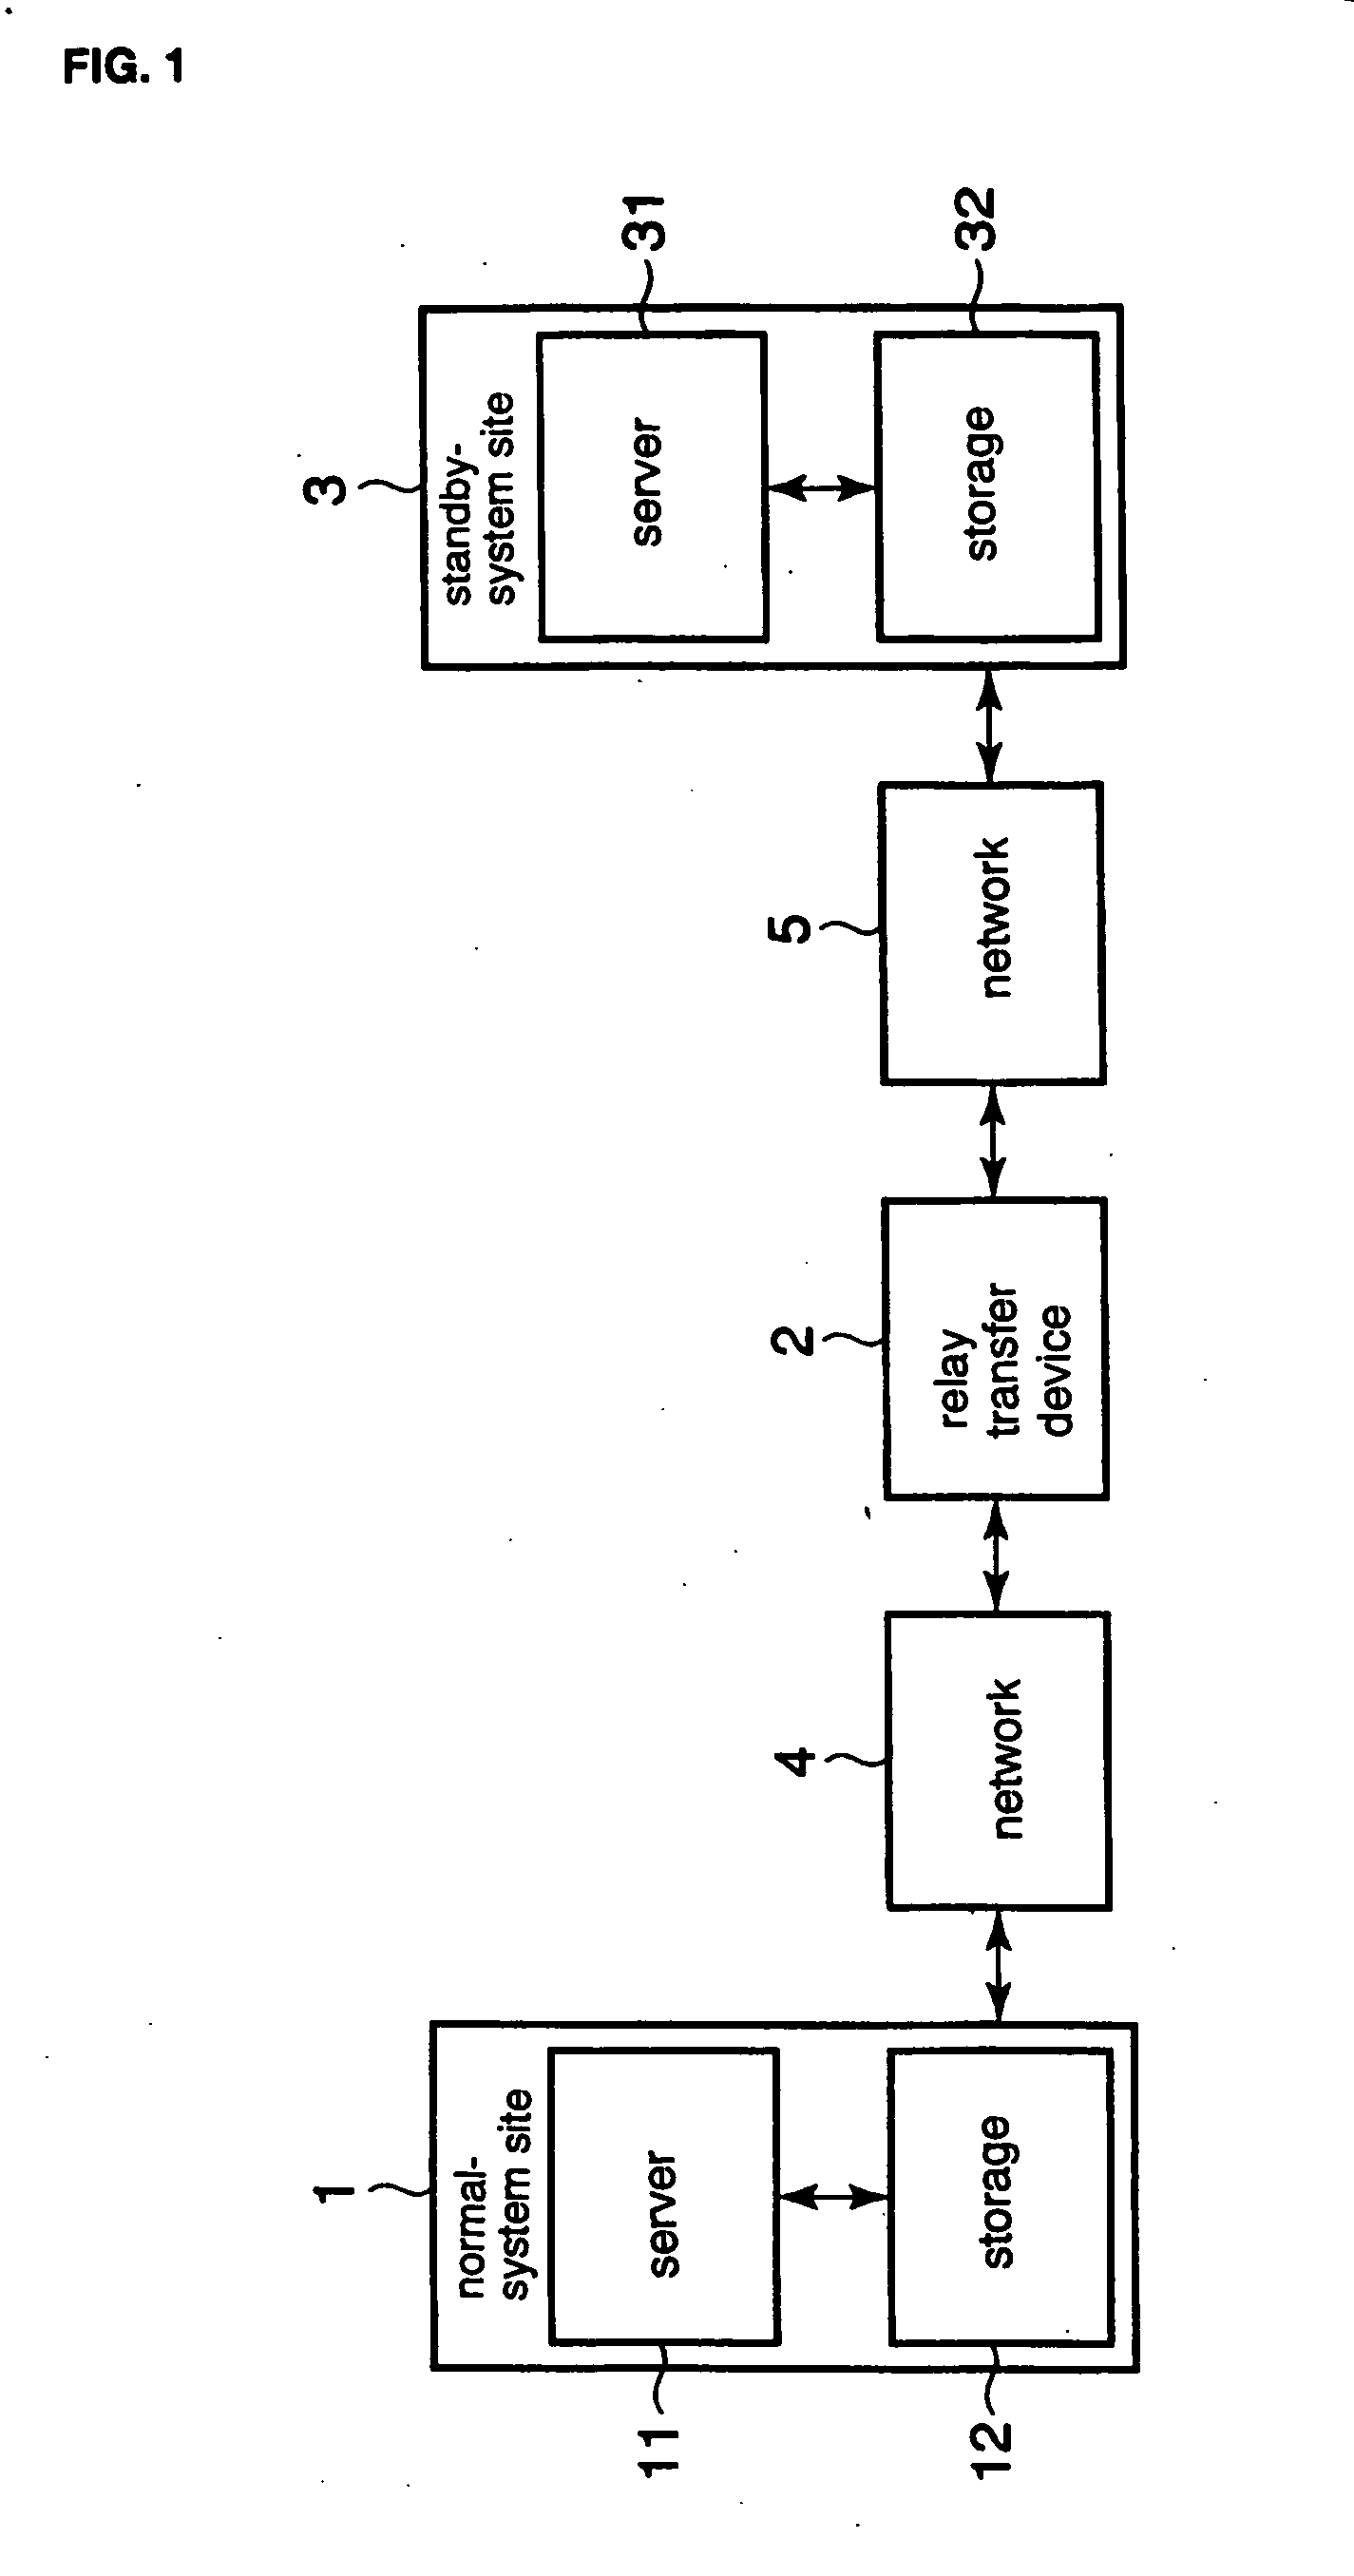 Replication system having the capability to accept commands at a standby-system site before completion of updating thereof